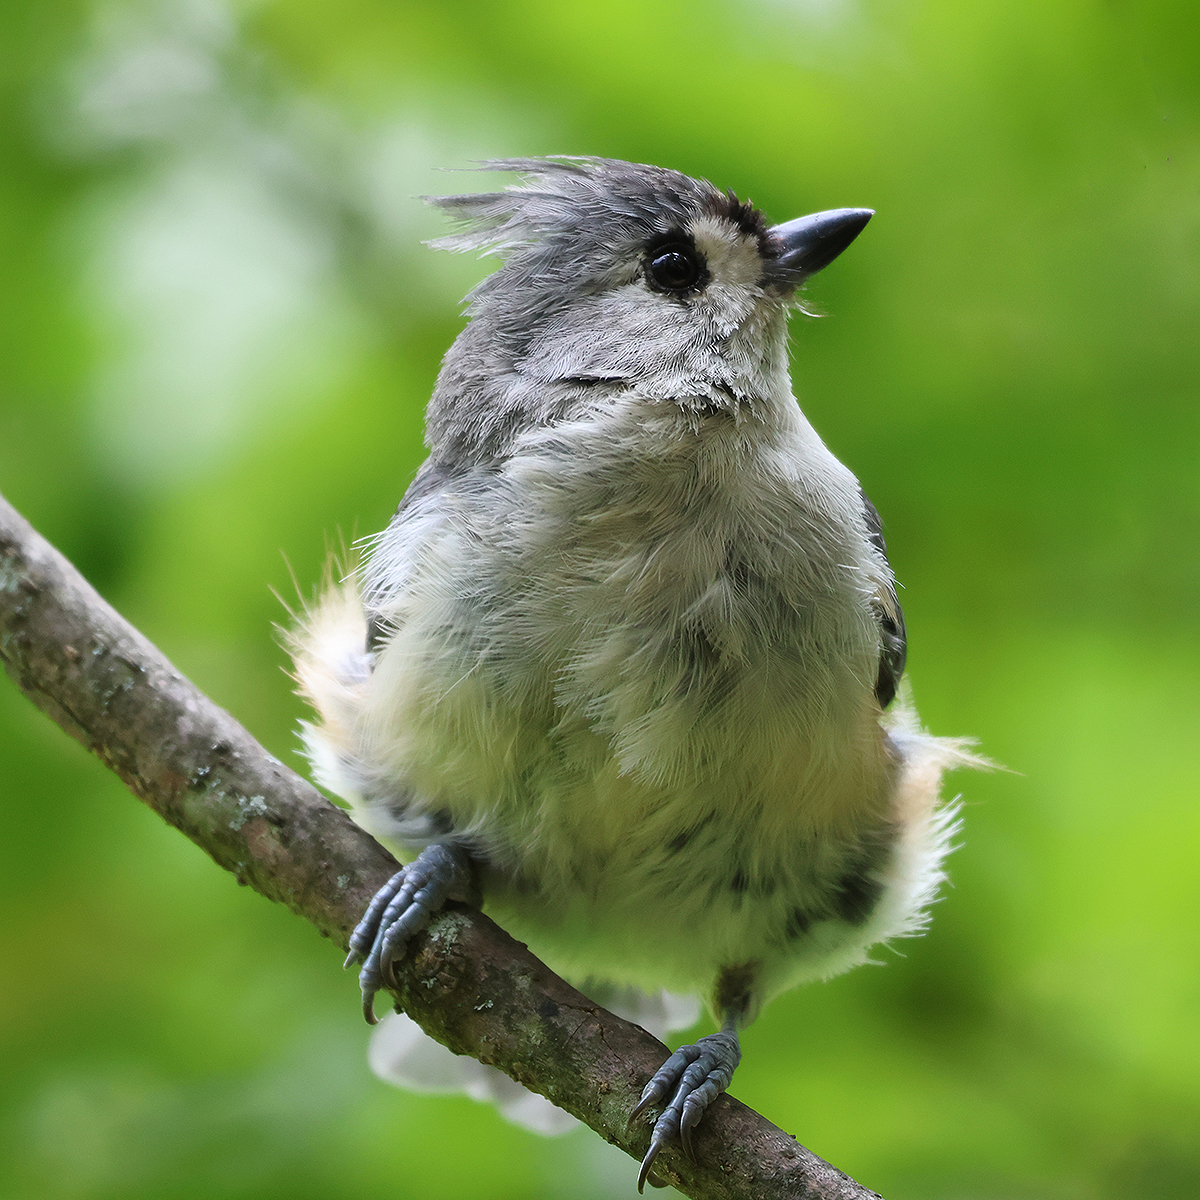 TUFTED TITMOUSE ABOUT TO LAUNCH by Jeremy Martin